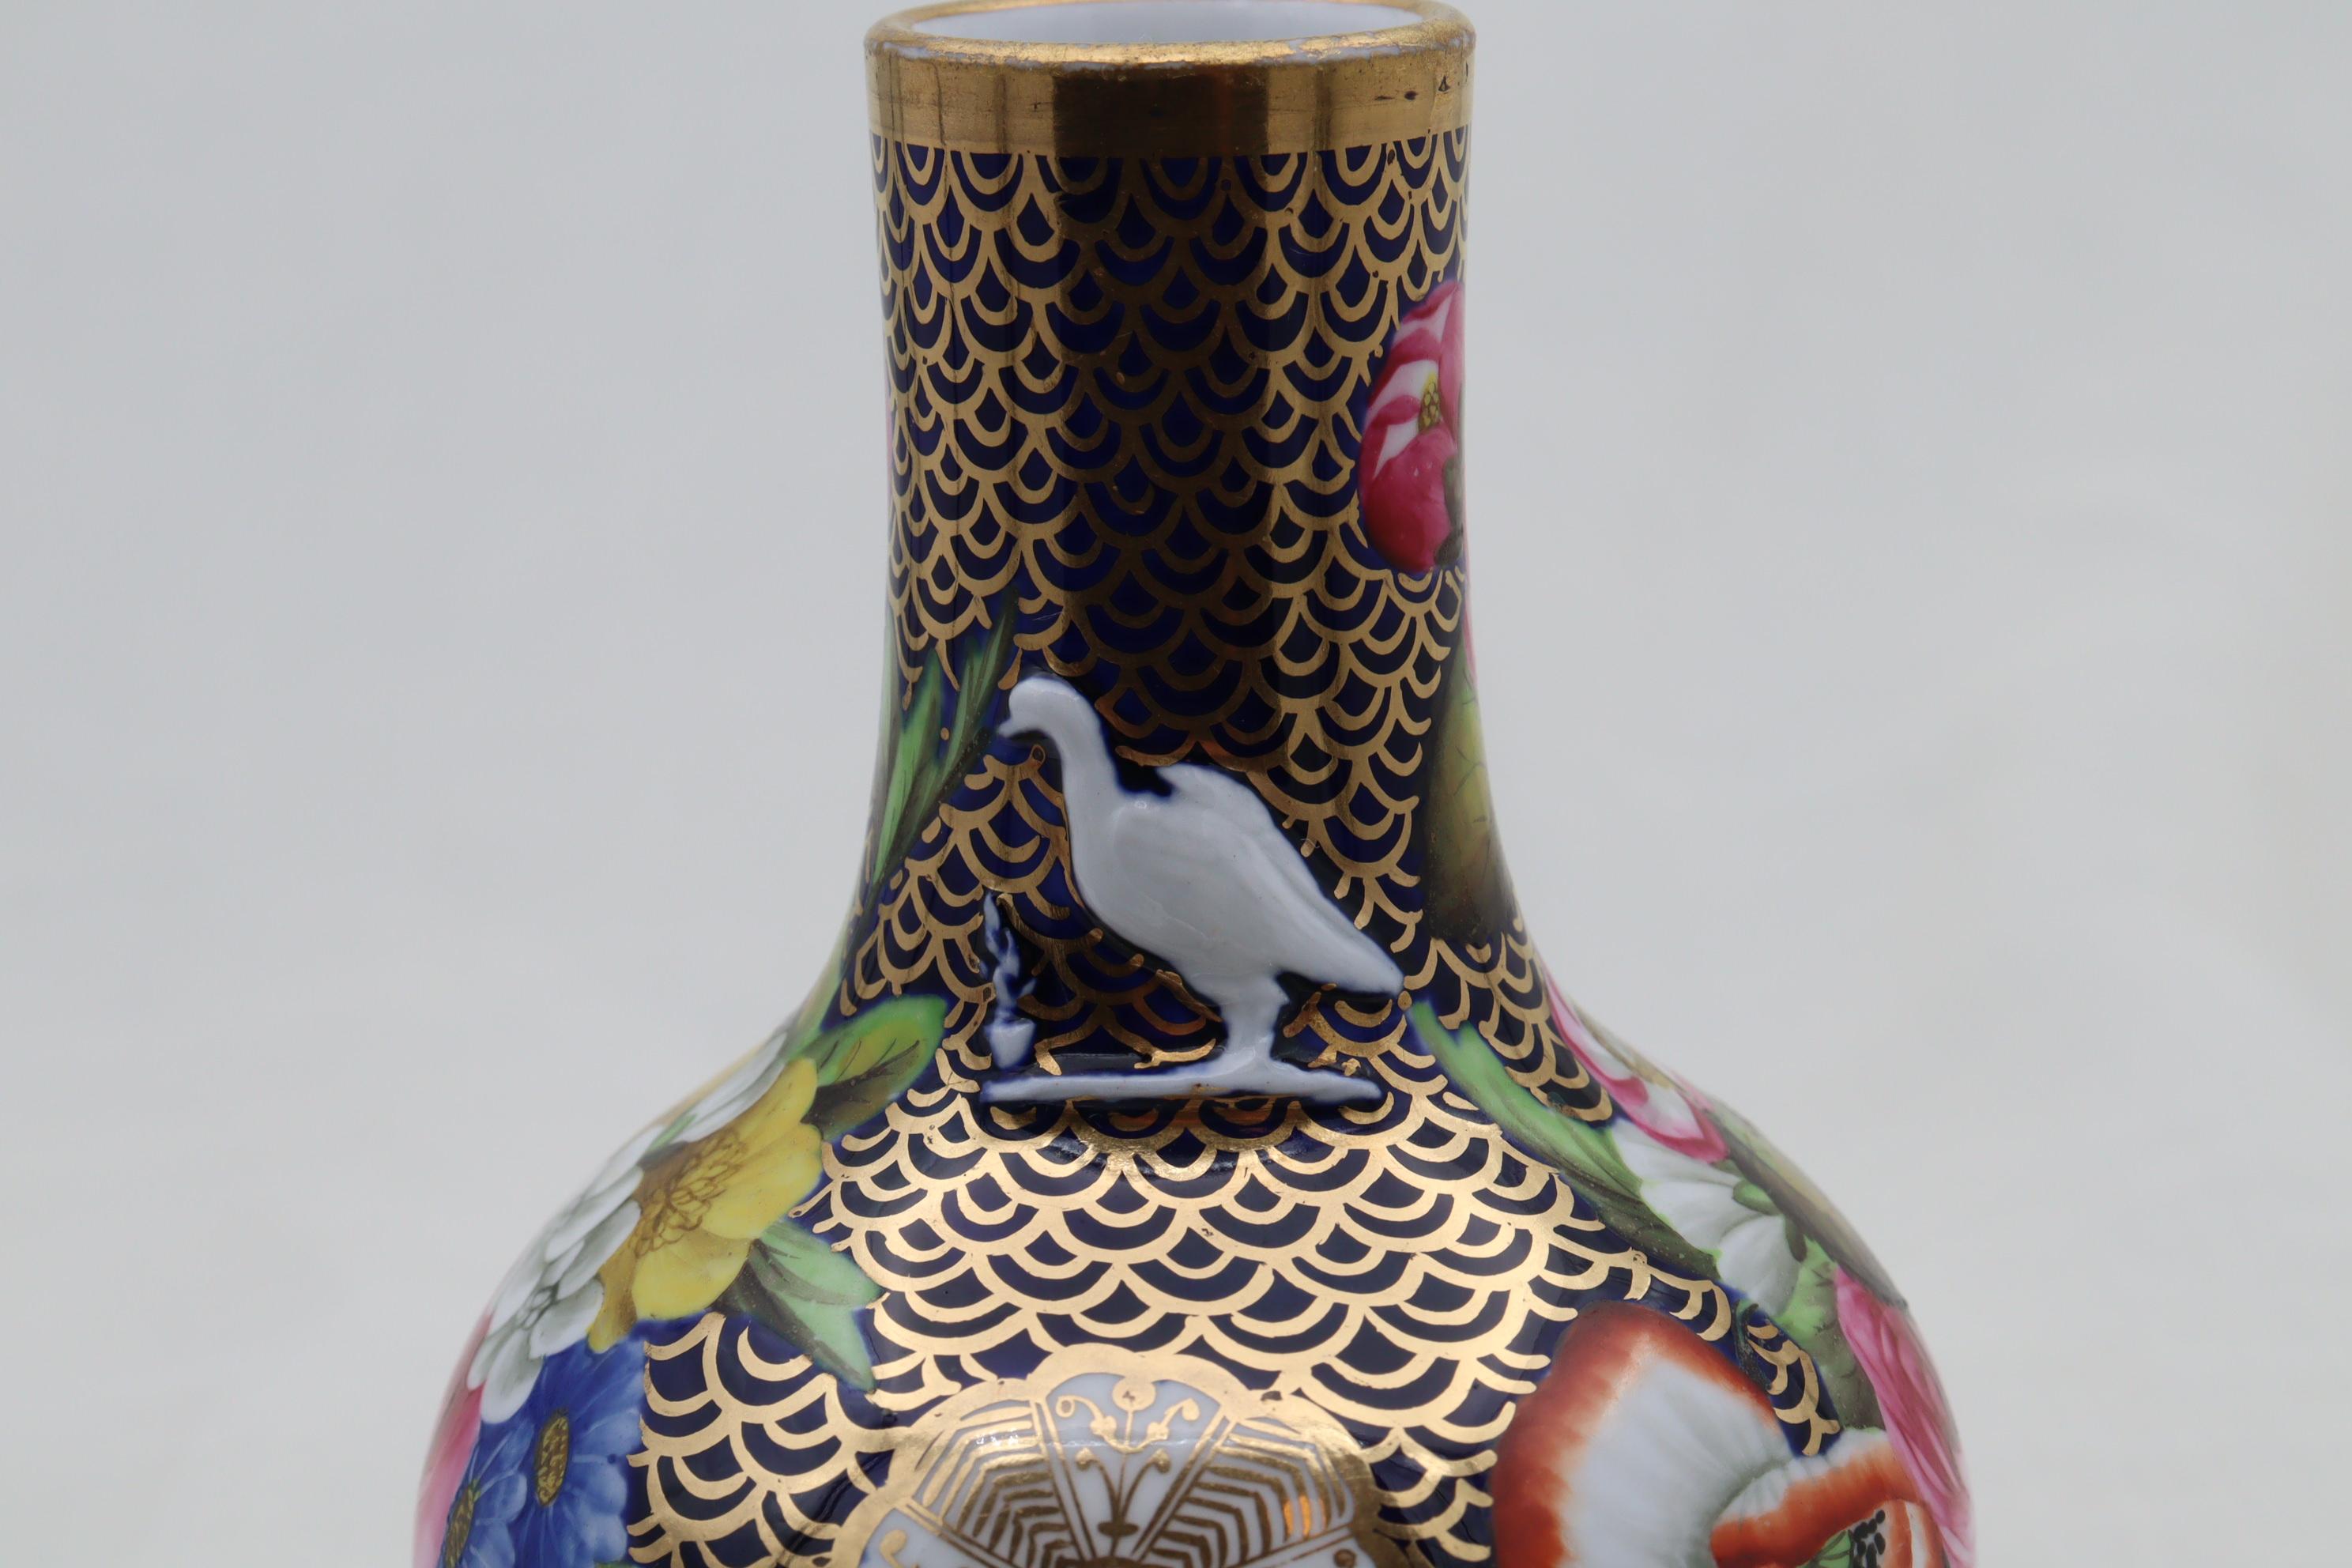 Spode Lizard Bottle decorated with pattern 1166 In Good Condition For Sale In East Geelong, VIC